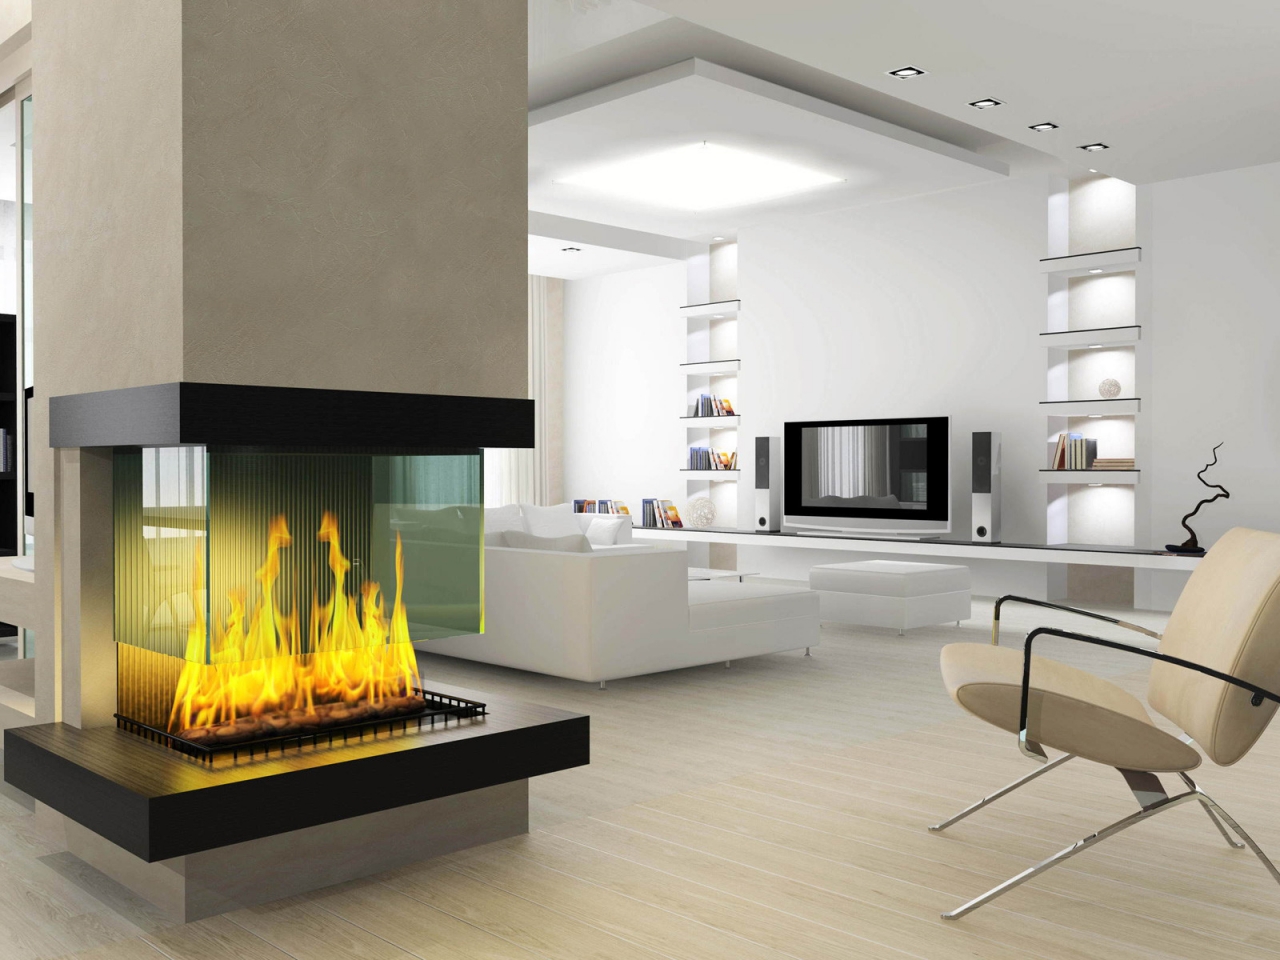 Fireplace for 1280 x 960 resolution